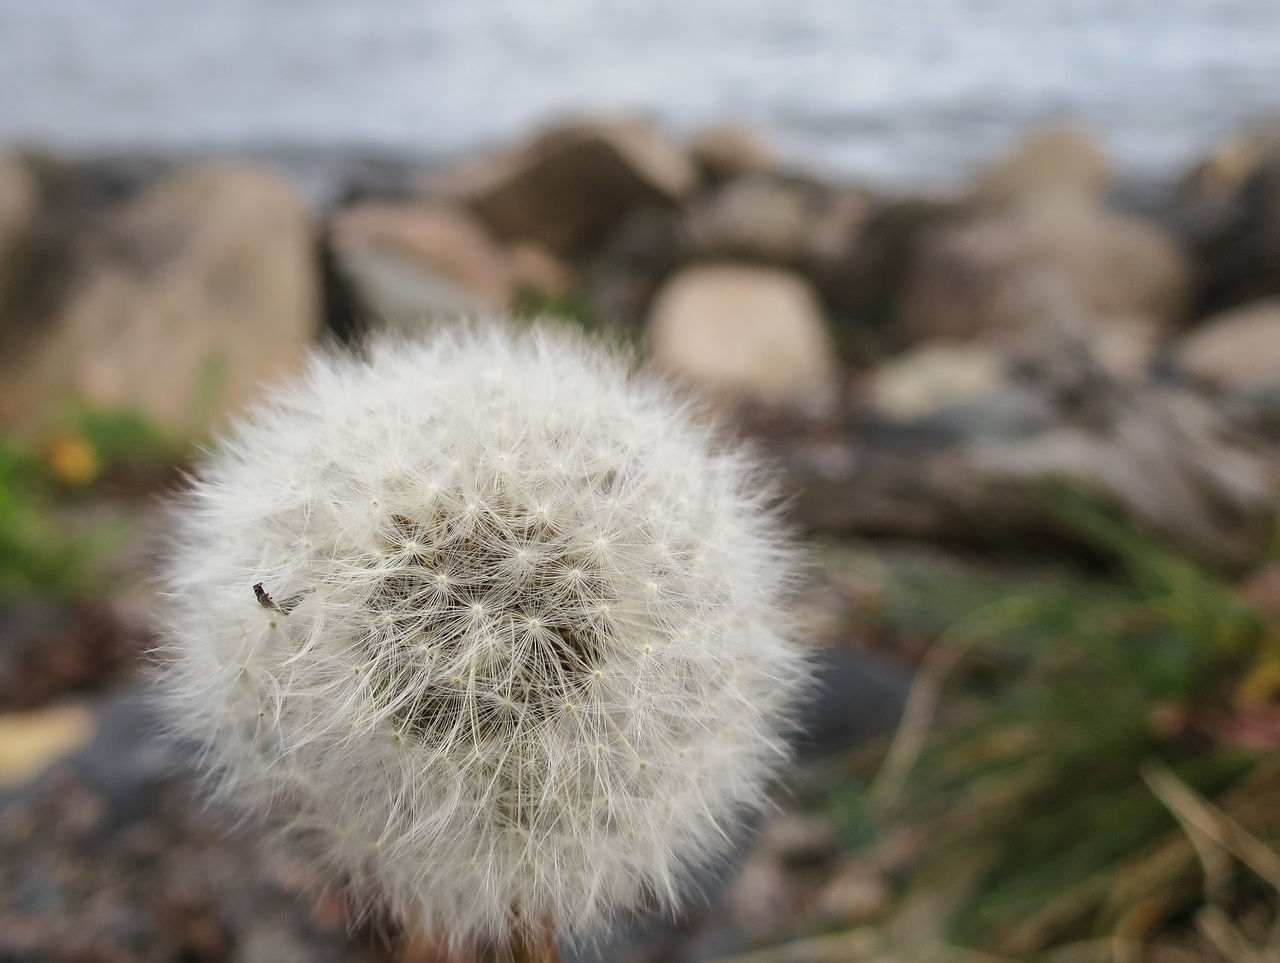 dandelion, flower, close-up, focus on foreground, fragility, growth, nature, white color, flower head, softness, beauty in nature, freshness, single flower, wildflower, selective focus, day, outdoors, plant, seed, uncultivated